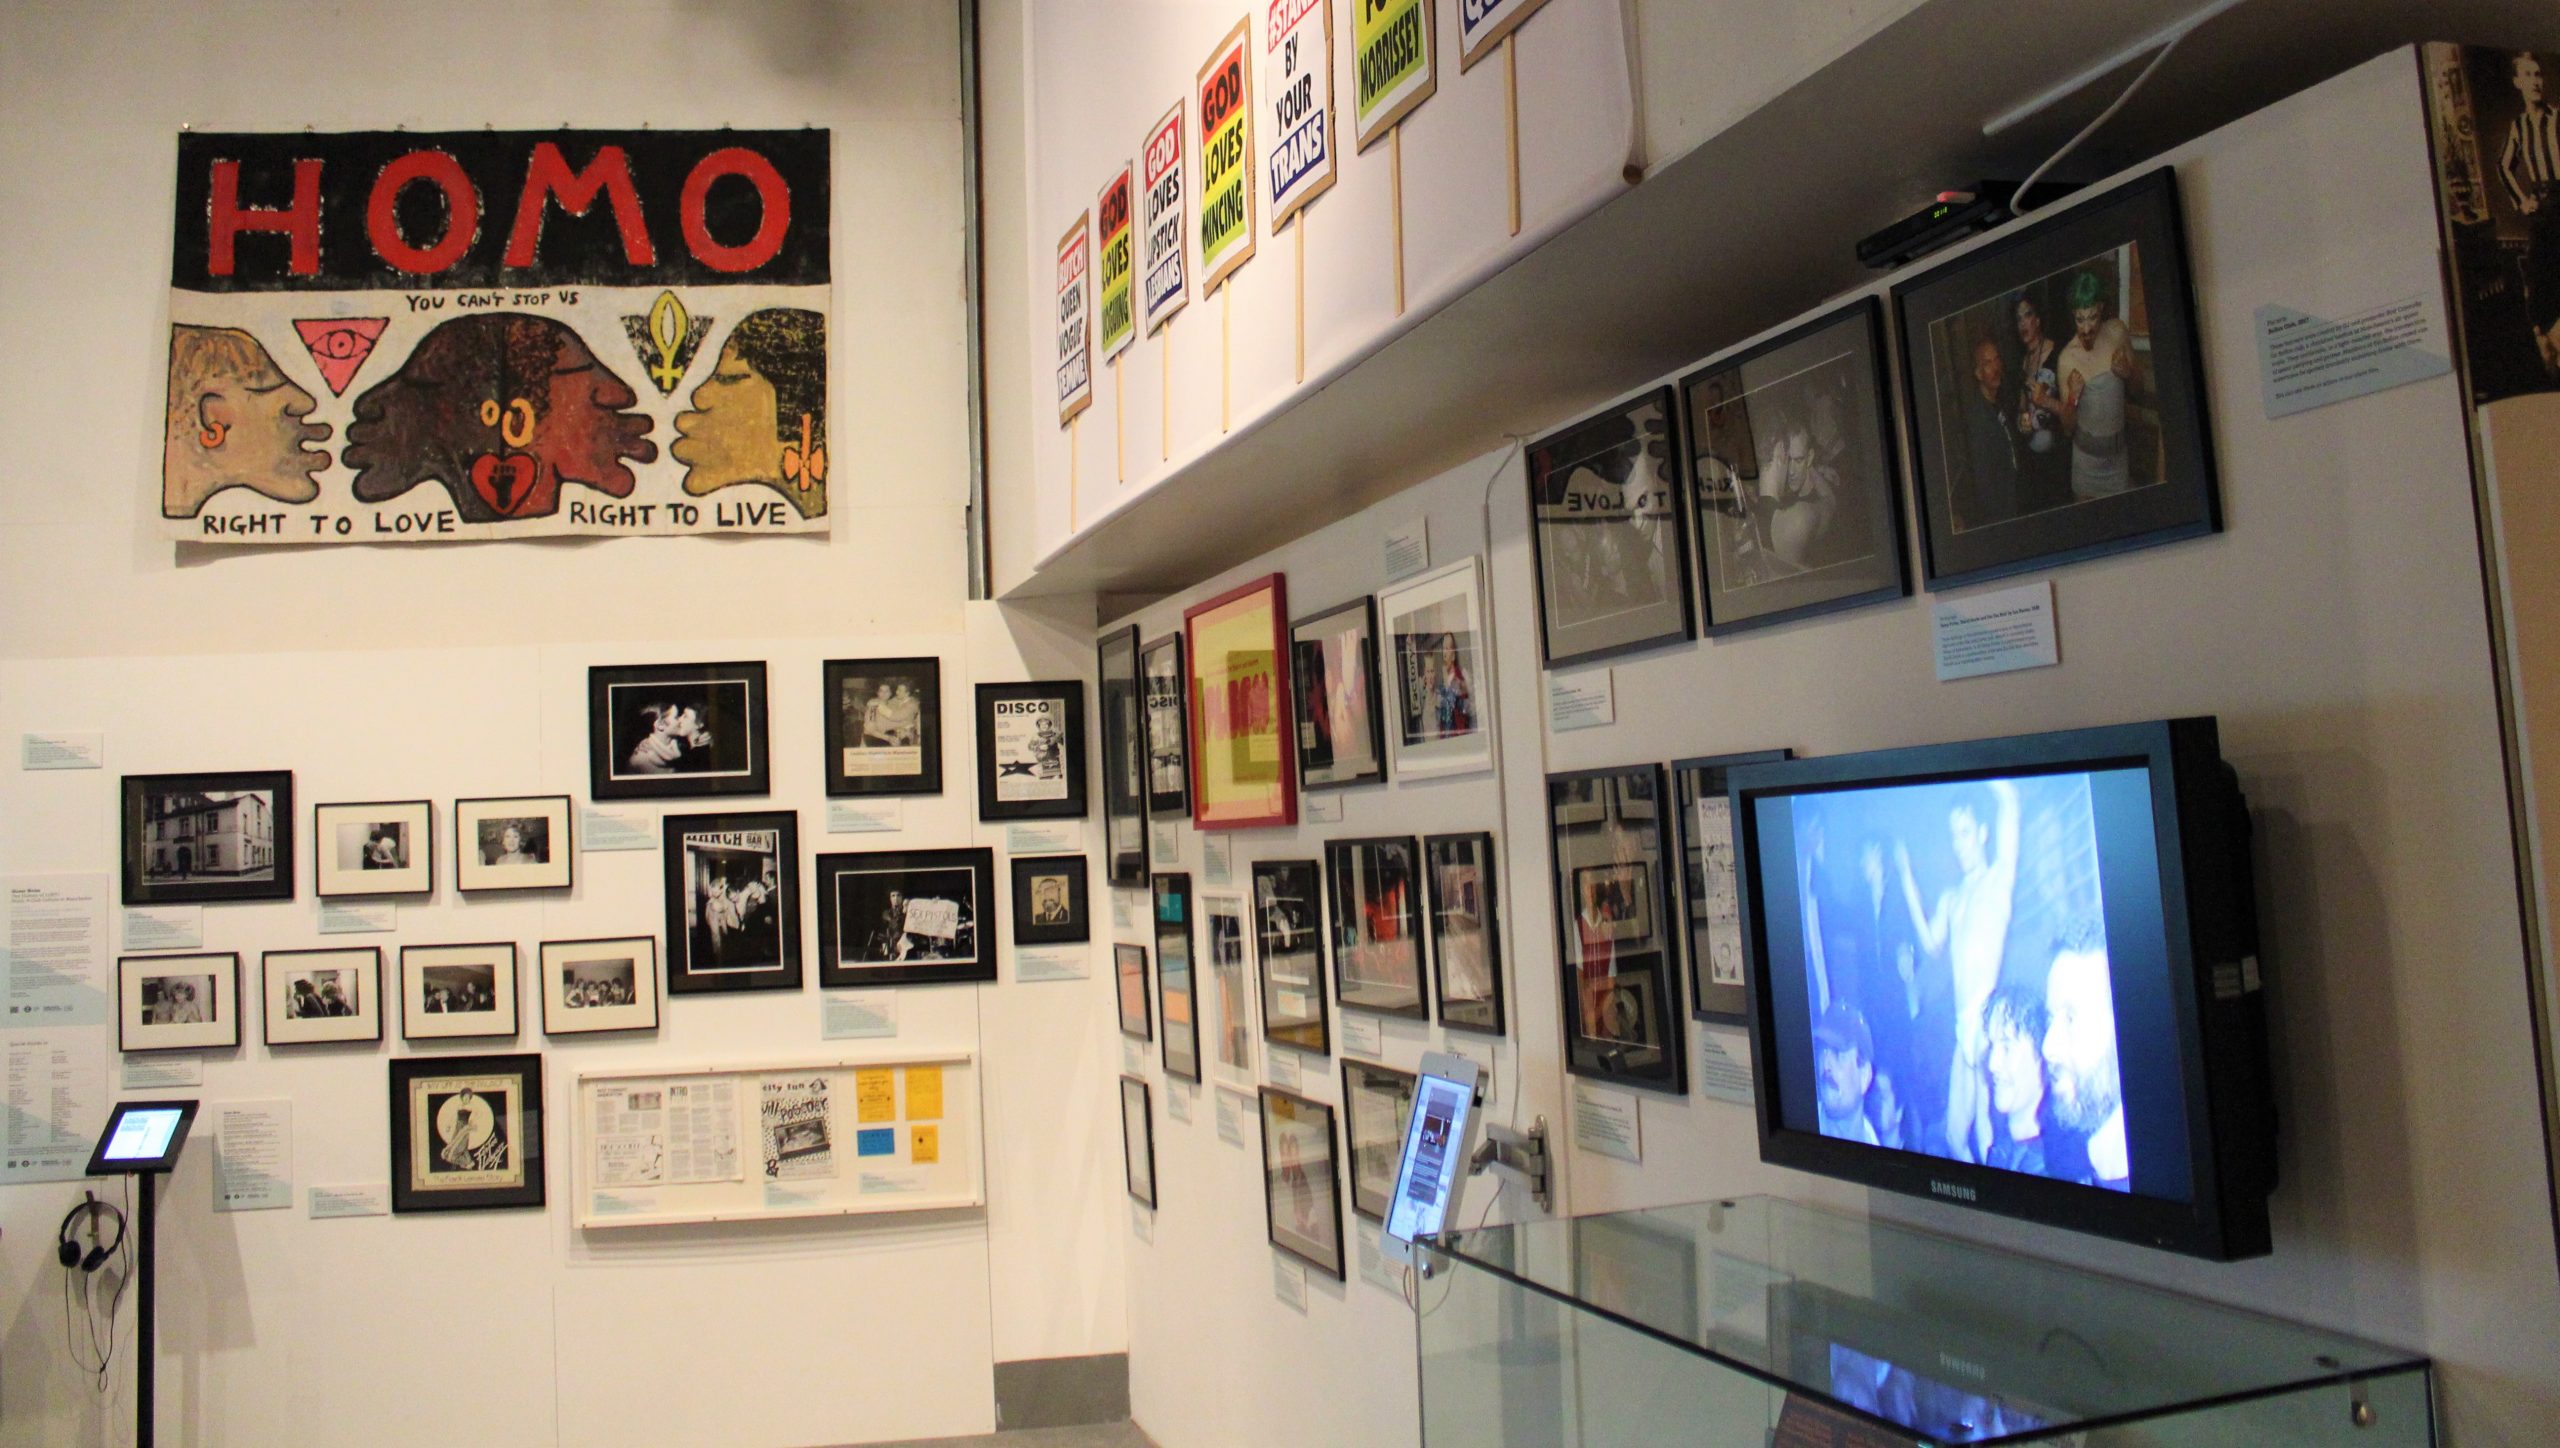 Queer Noise exhibition at People's History Museum, 2017. Photograph of the corner of an L shaped exhibition wall covered with framed photographs, images and a television monitor. At the top of the far wall is a large painted paper banner which includes the profiles of four kissing faces, each is a different colour. The banner reads ‘HOMO - You Can’t Stop Us - Right To Love - Right To Live’.